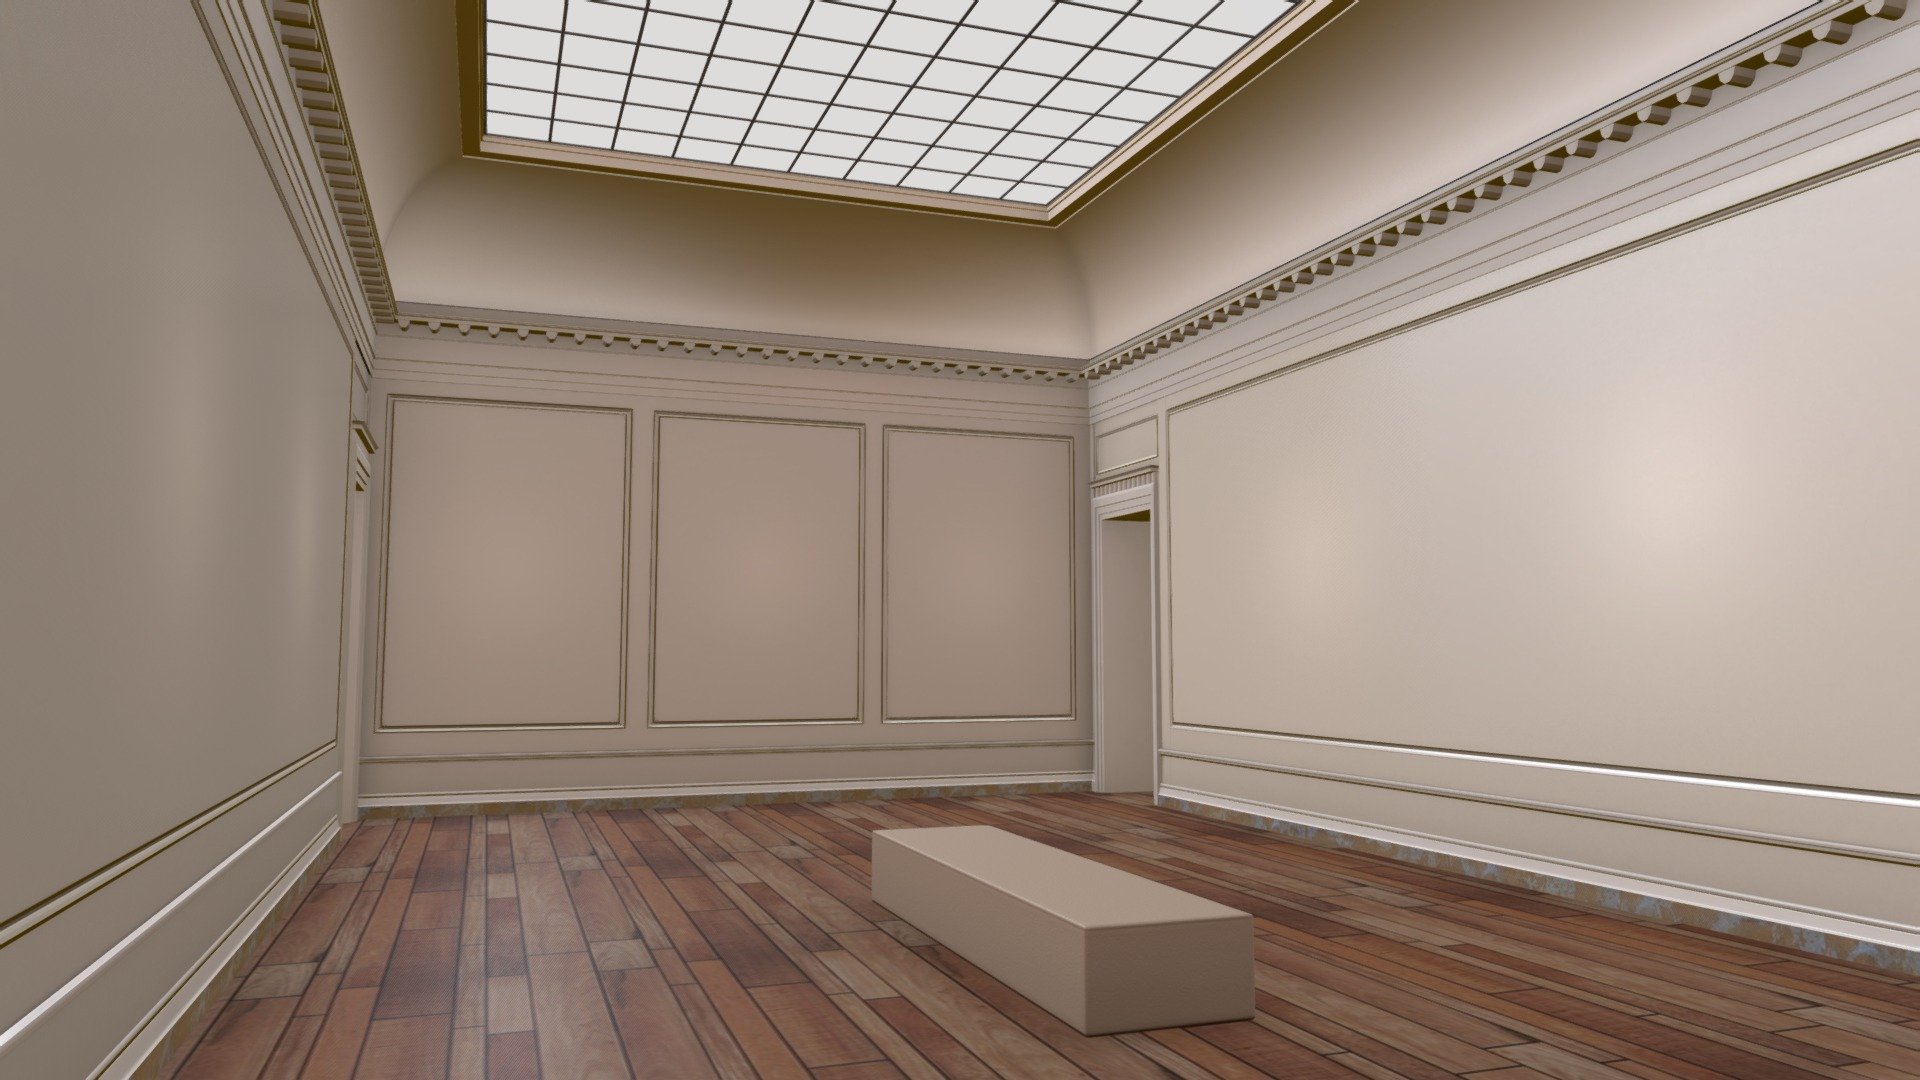 VR Gallery interior made for Product Showcase, scene has got baked in lighting.
Ambient Occlusion and lighting with Blender.
Format FBX file size : 344KB

Click on the link to see more models : https://sketchfab.com/GbehnamG/store

If you need customized 3d models , feel free to contact at: mr.gbehnamg@yahoo.com - VR Traditional Art Gallery Stage Hall 07 - Buy Royalty Free 3D model by BehNaM (@GbehnamG) 3d model